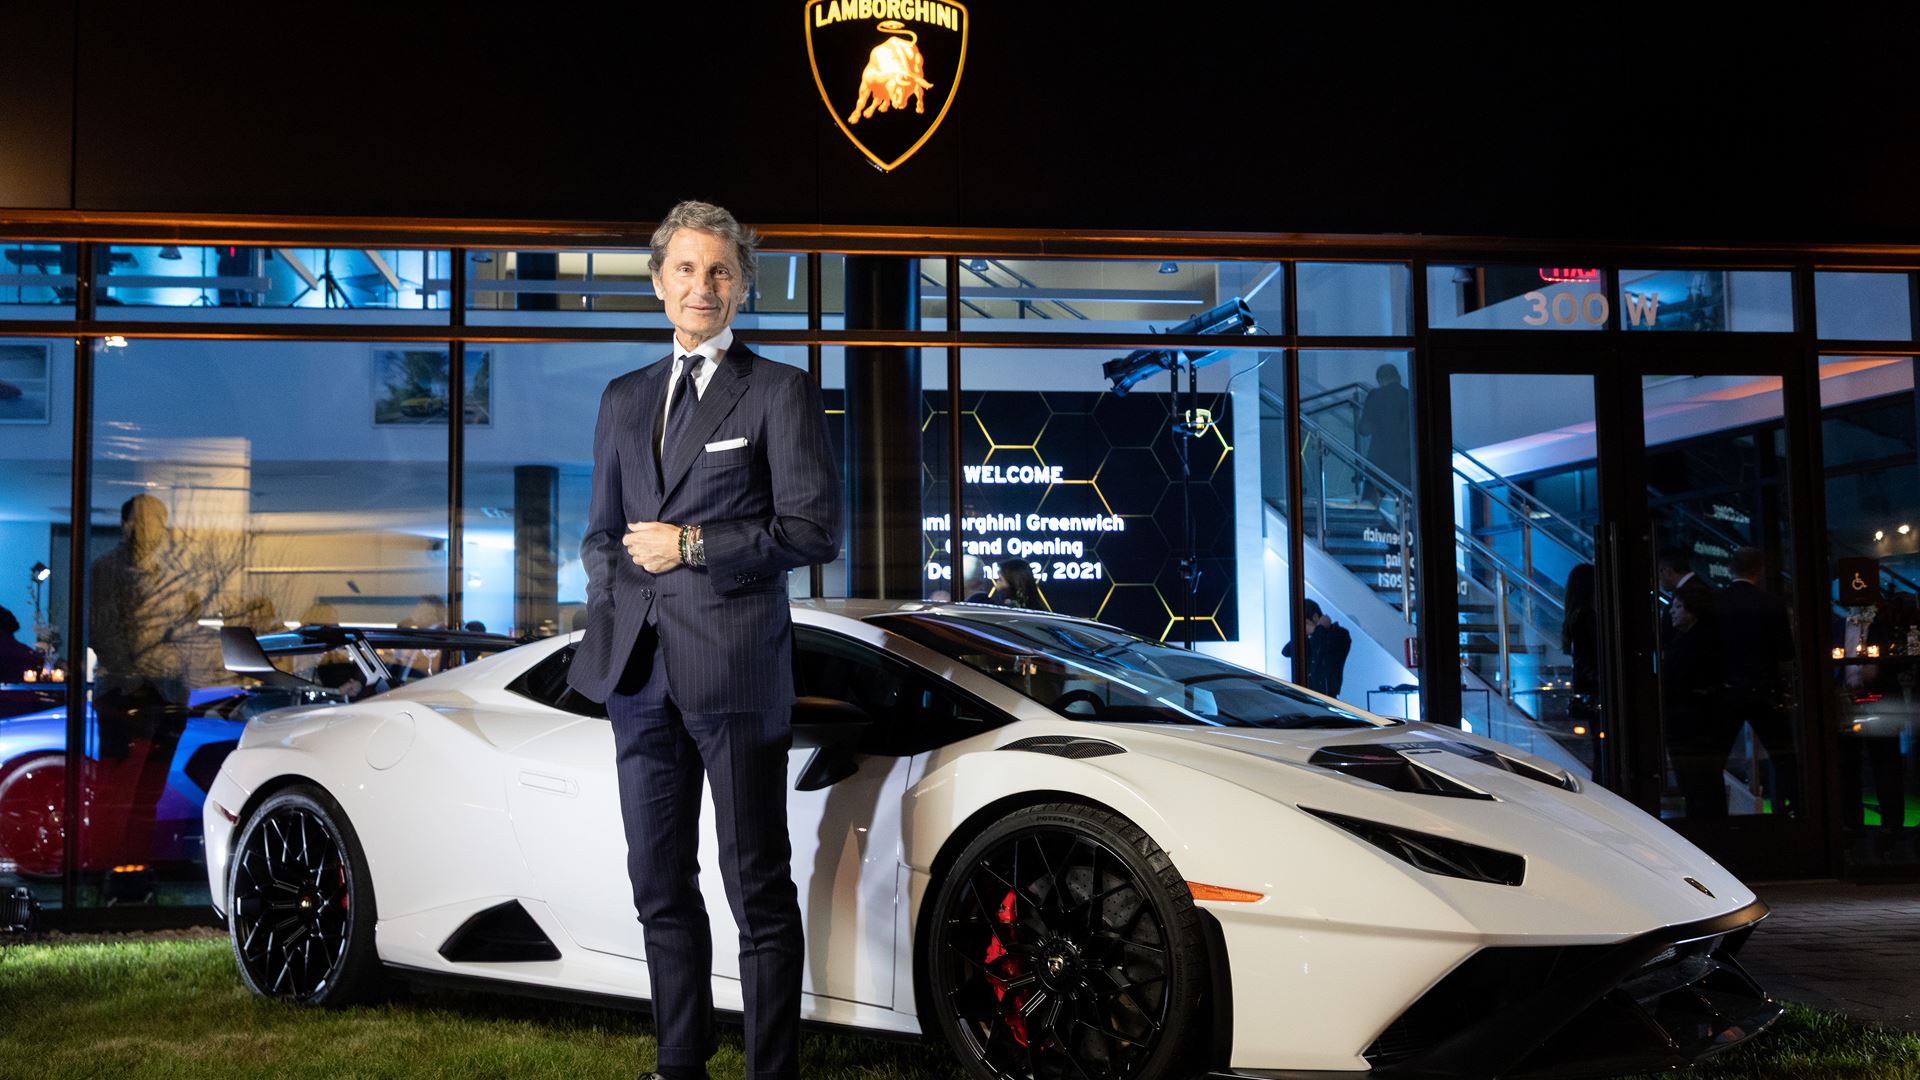 Lamborghini Expands Retail Footprint in US with New Showroom in Greenwich, CT - Image 3